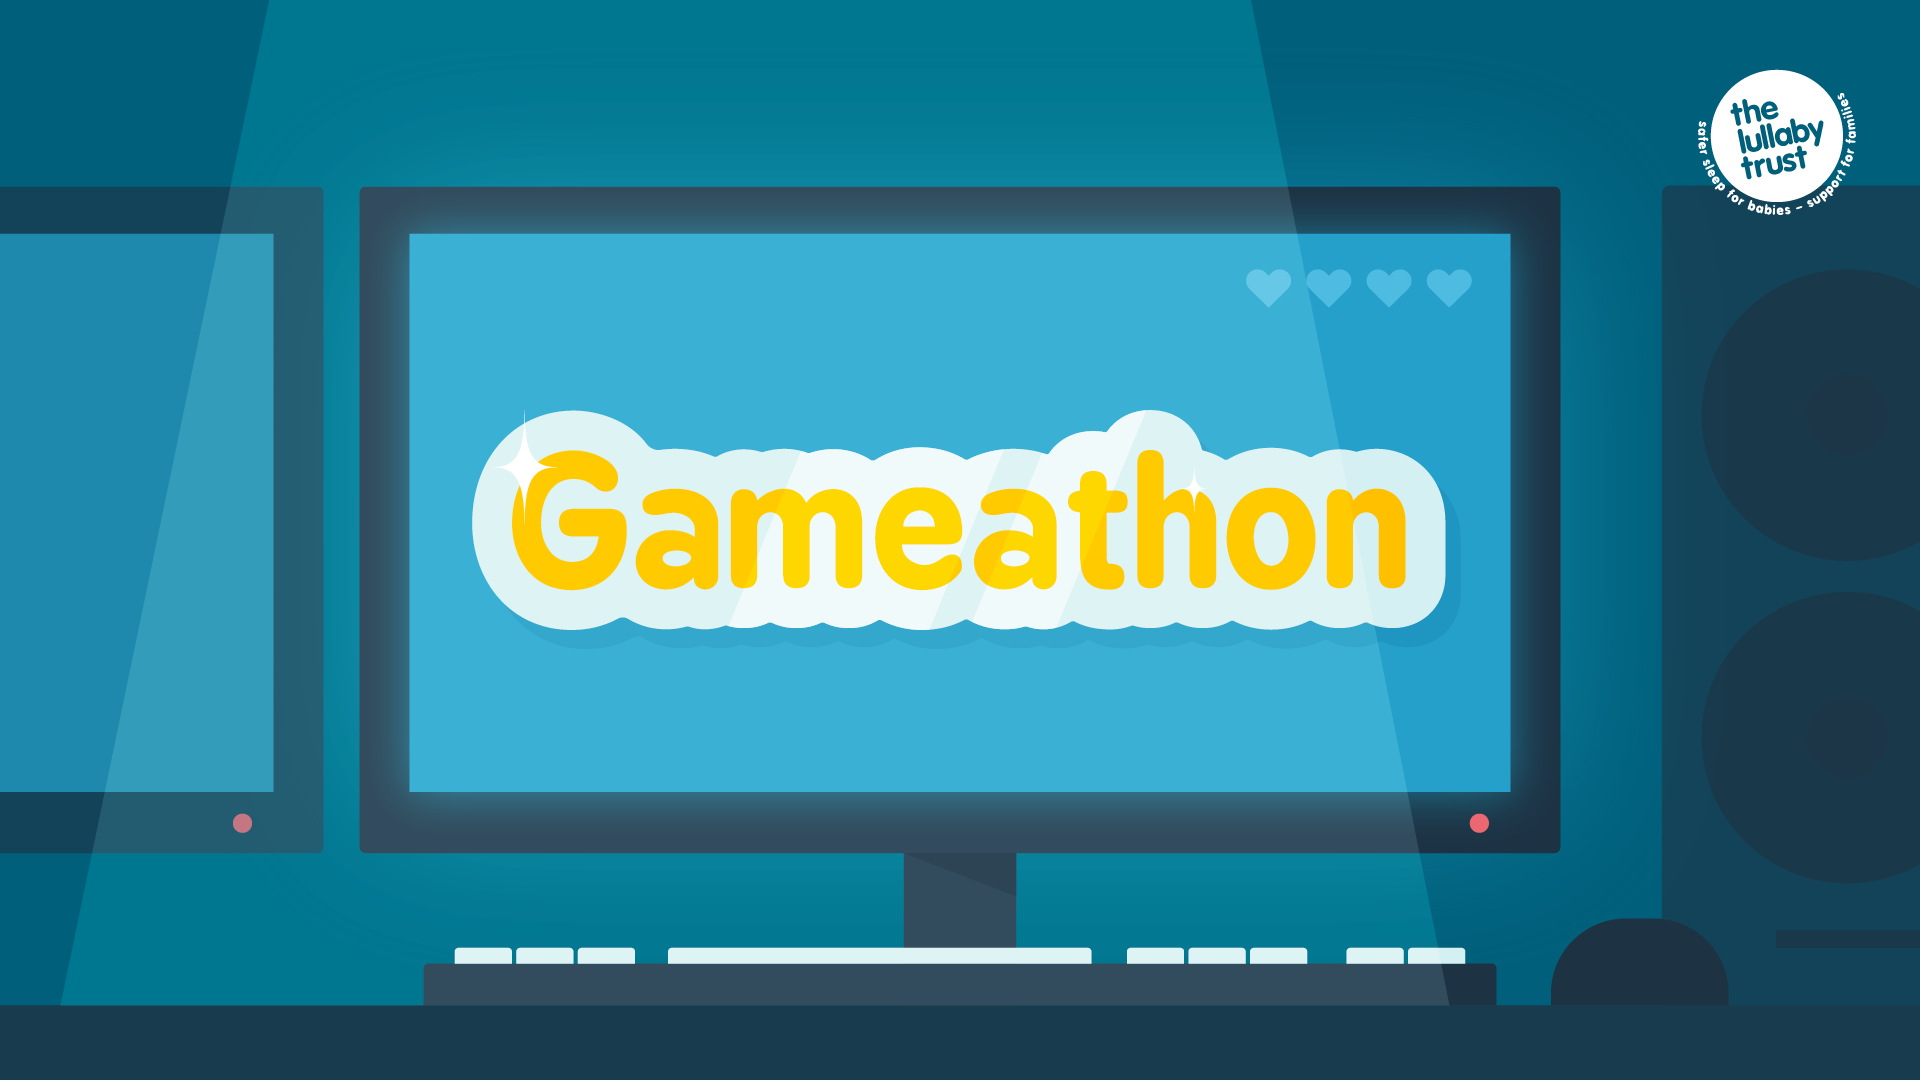 A blue computer screen. The screen reads 'Gameathon' in yellow writing.